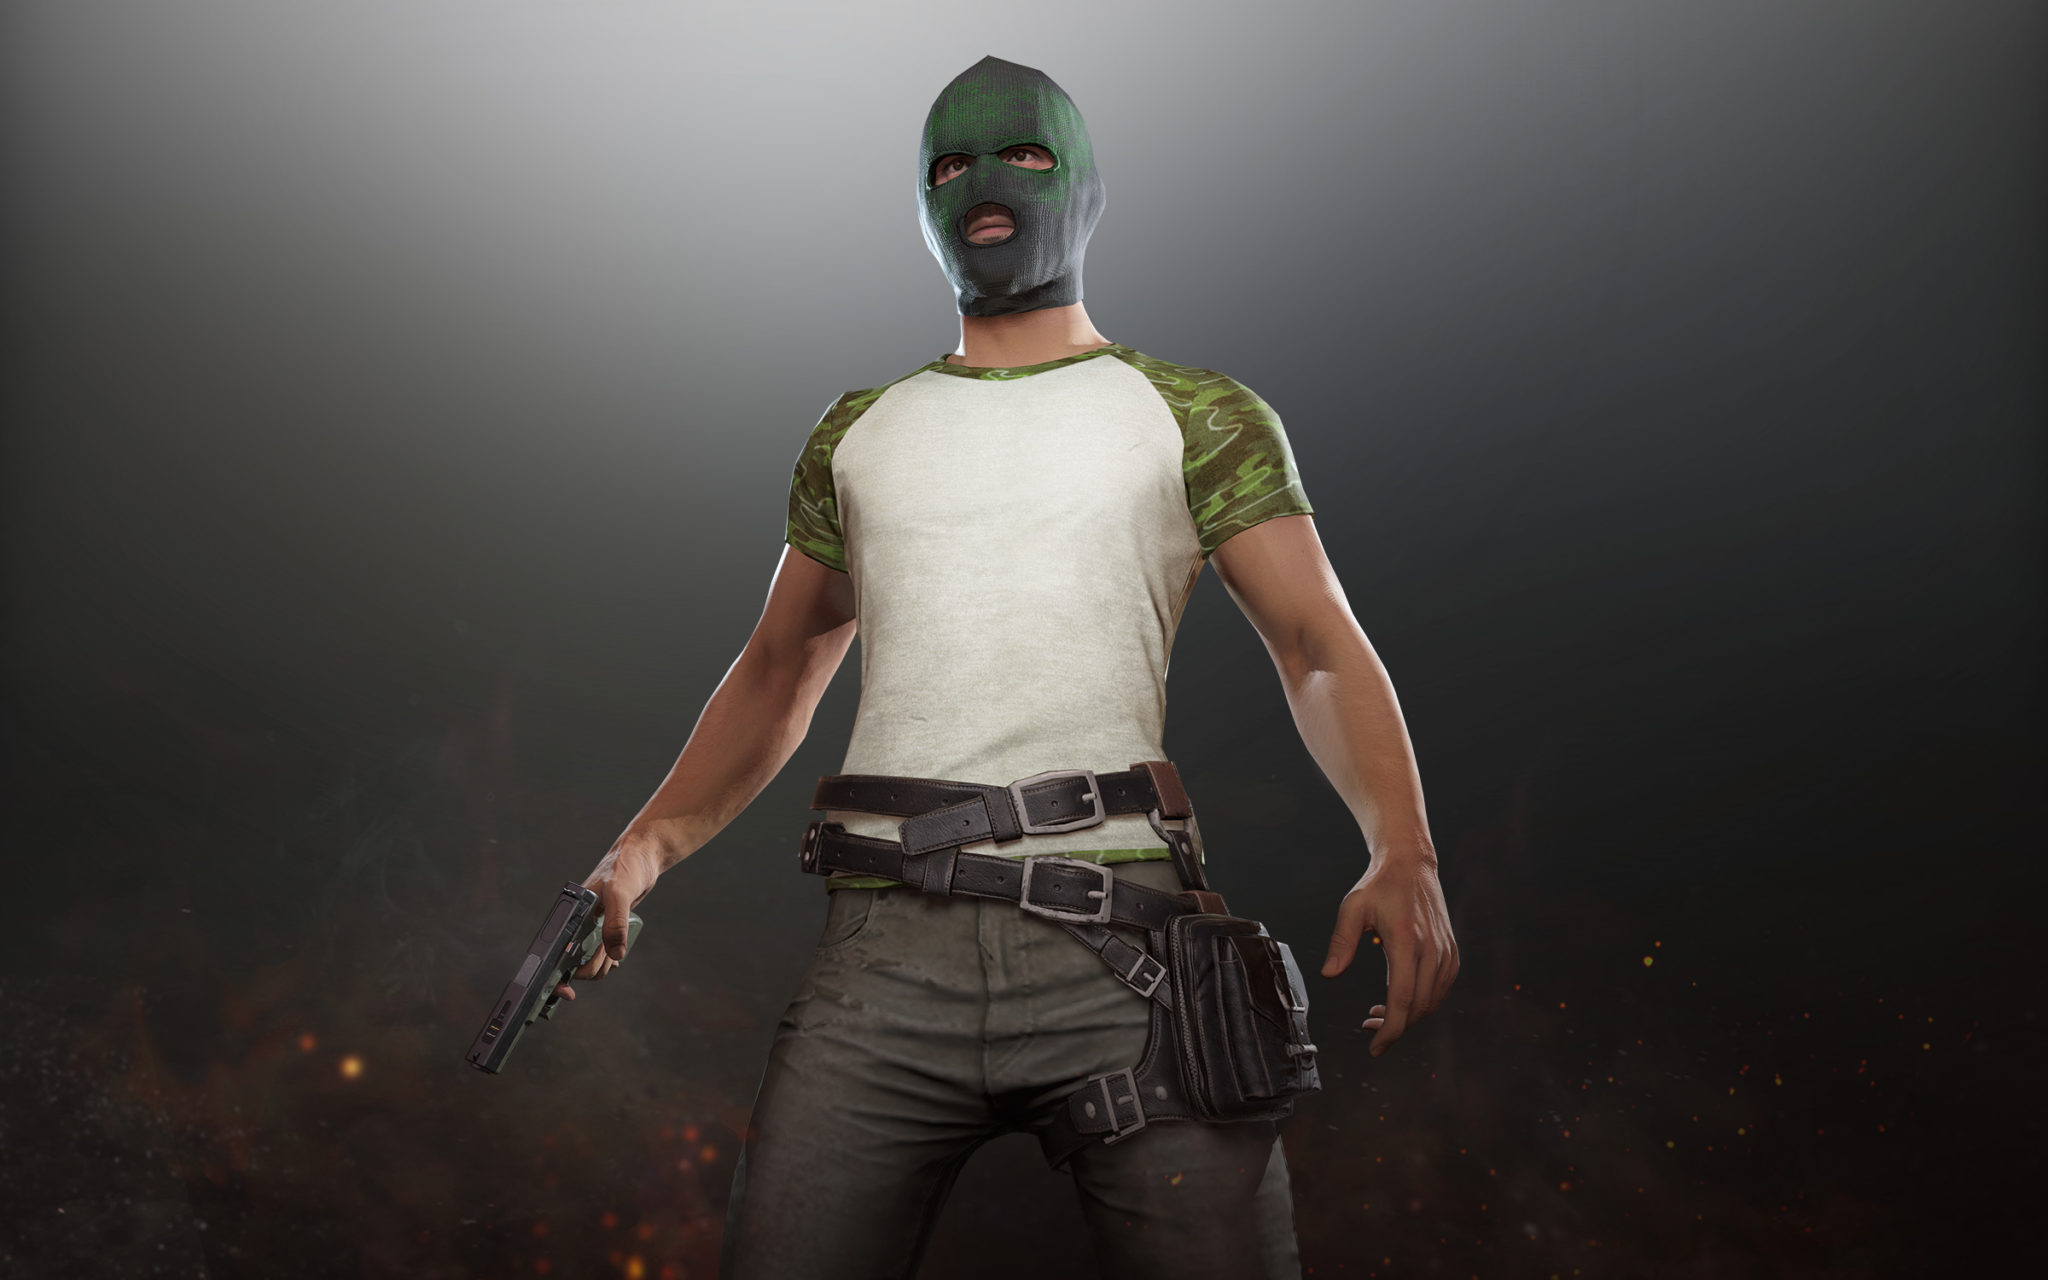 Get Ready to Gear Up for PlayerUnknown’s Battlegrounds With Limited-Edition Cosmetic Packs